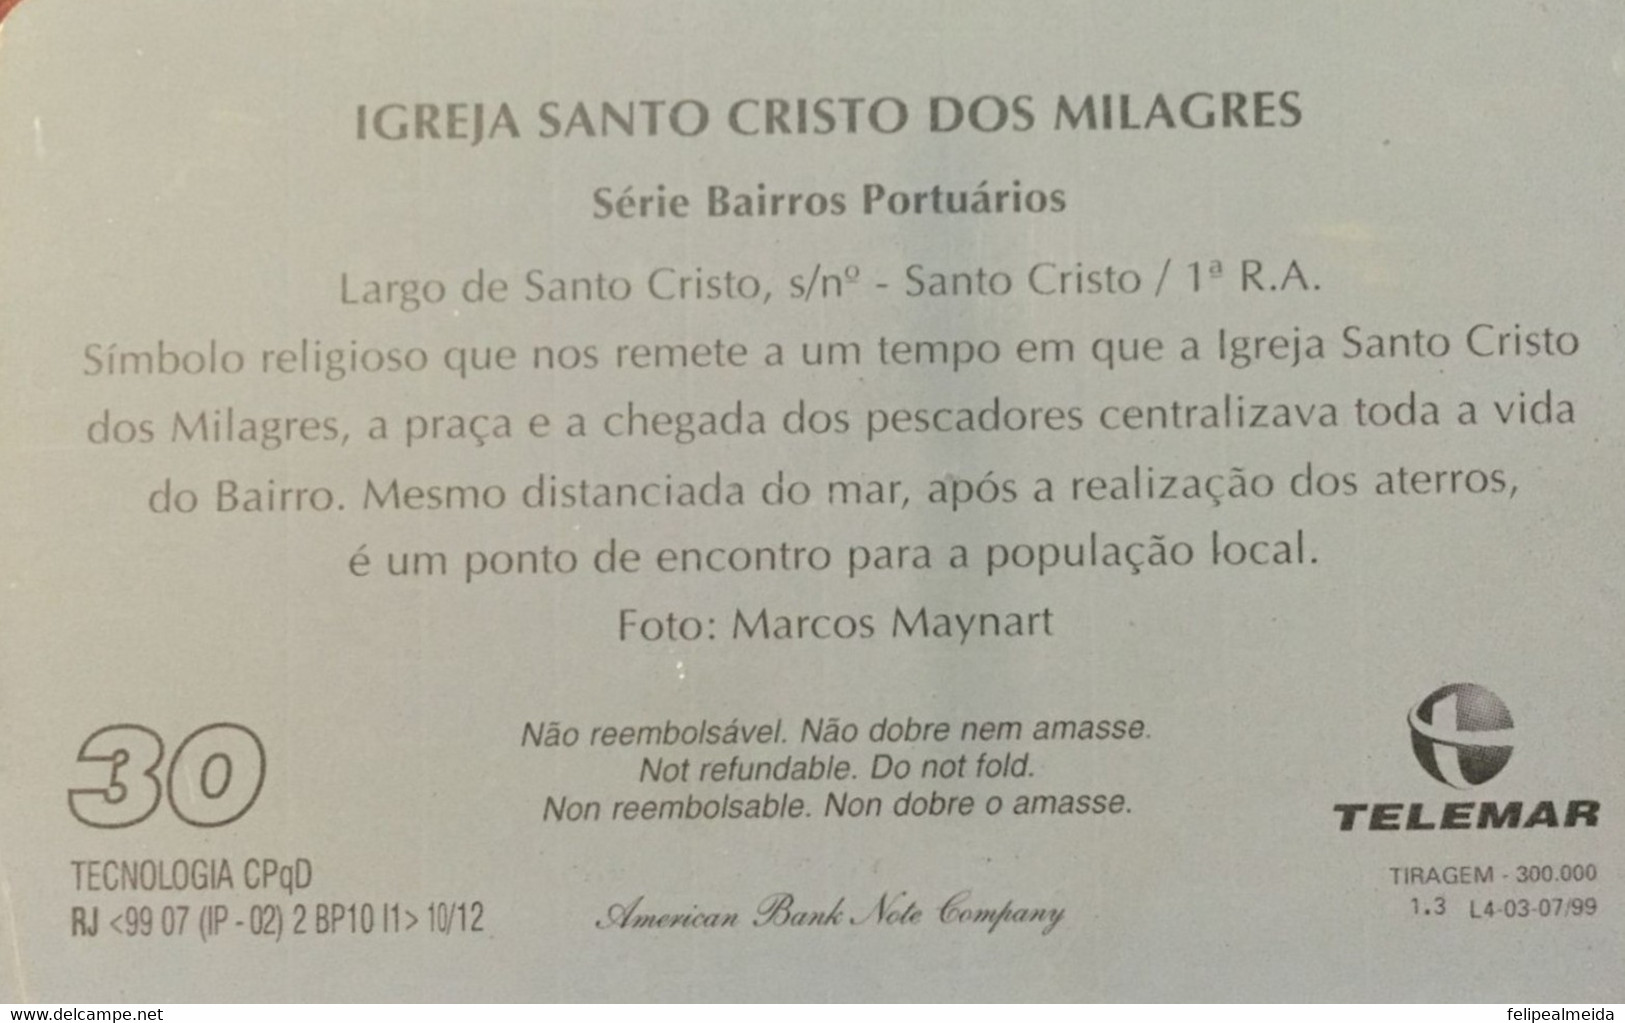 Phone Card Produced By Telemar In 1999 - Bairros Portuários Series - Santo Cristo Dos Milagres Church - Ontwikkeling